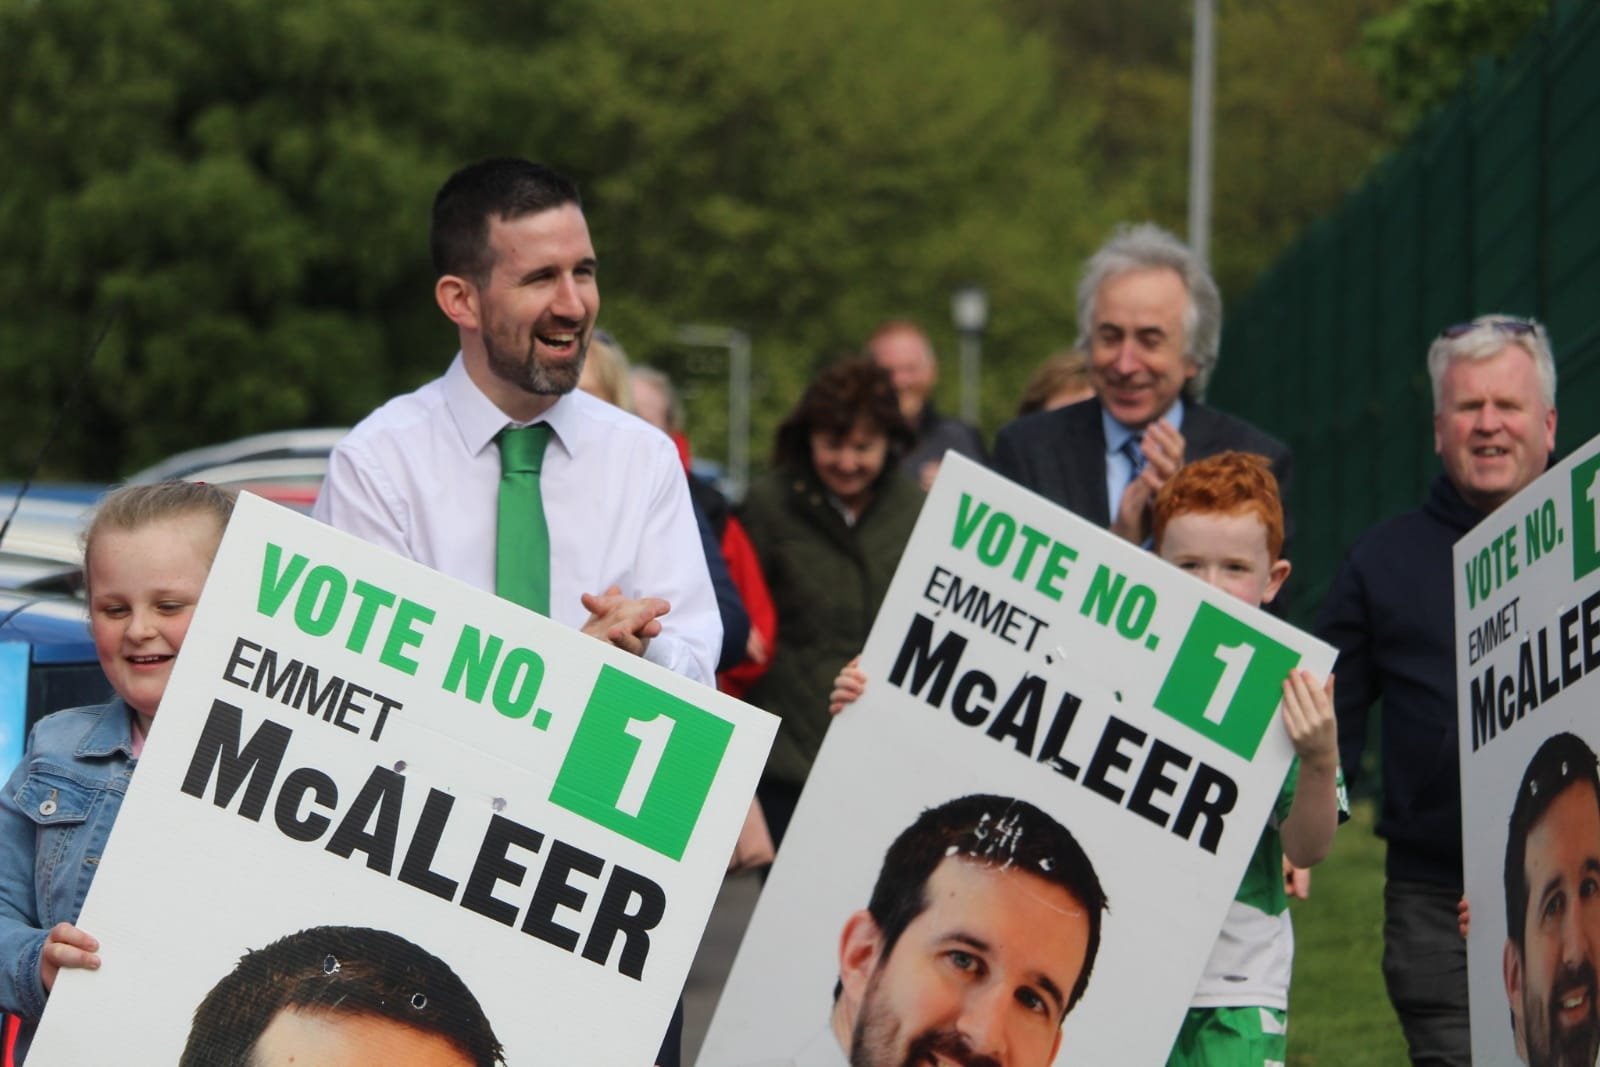 McAleer_1 Profile Picture